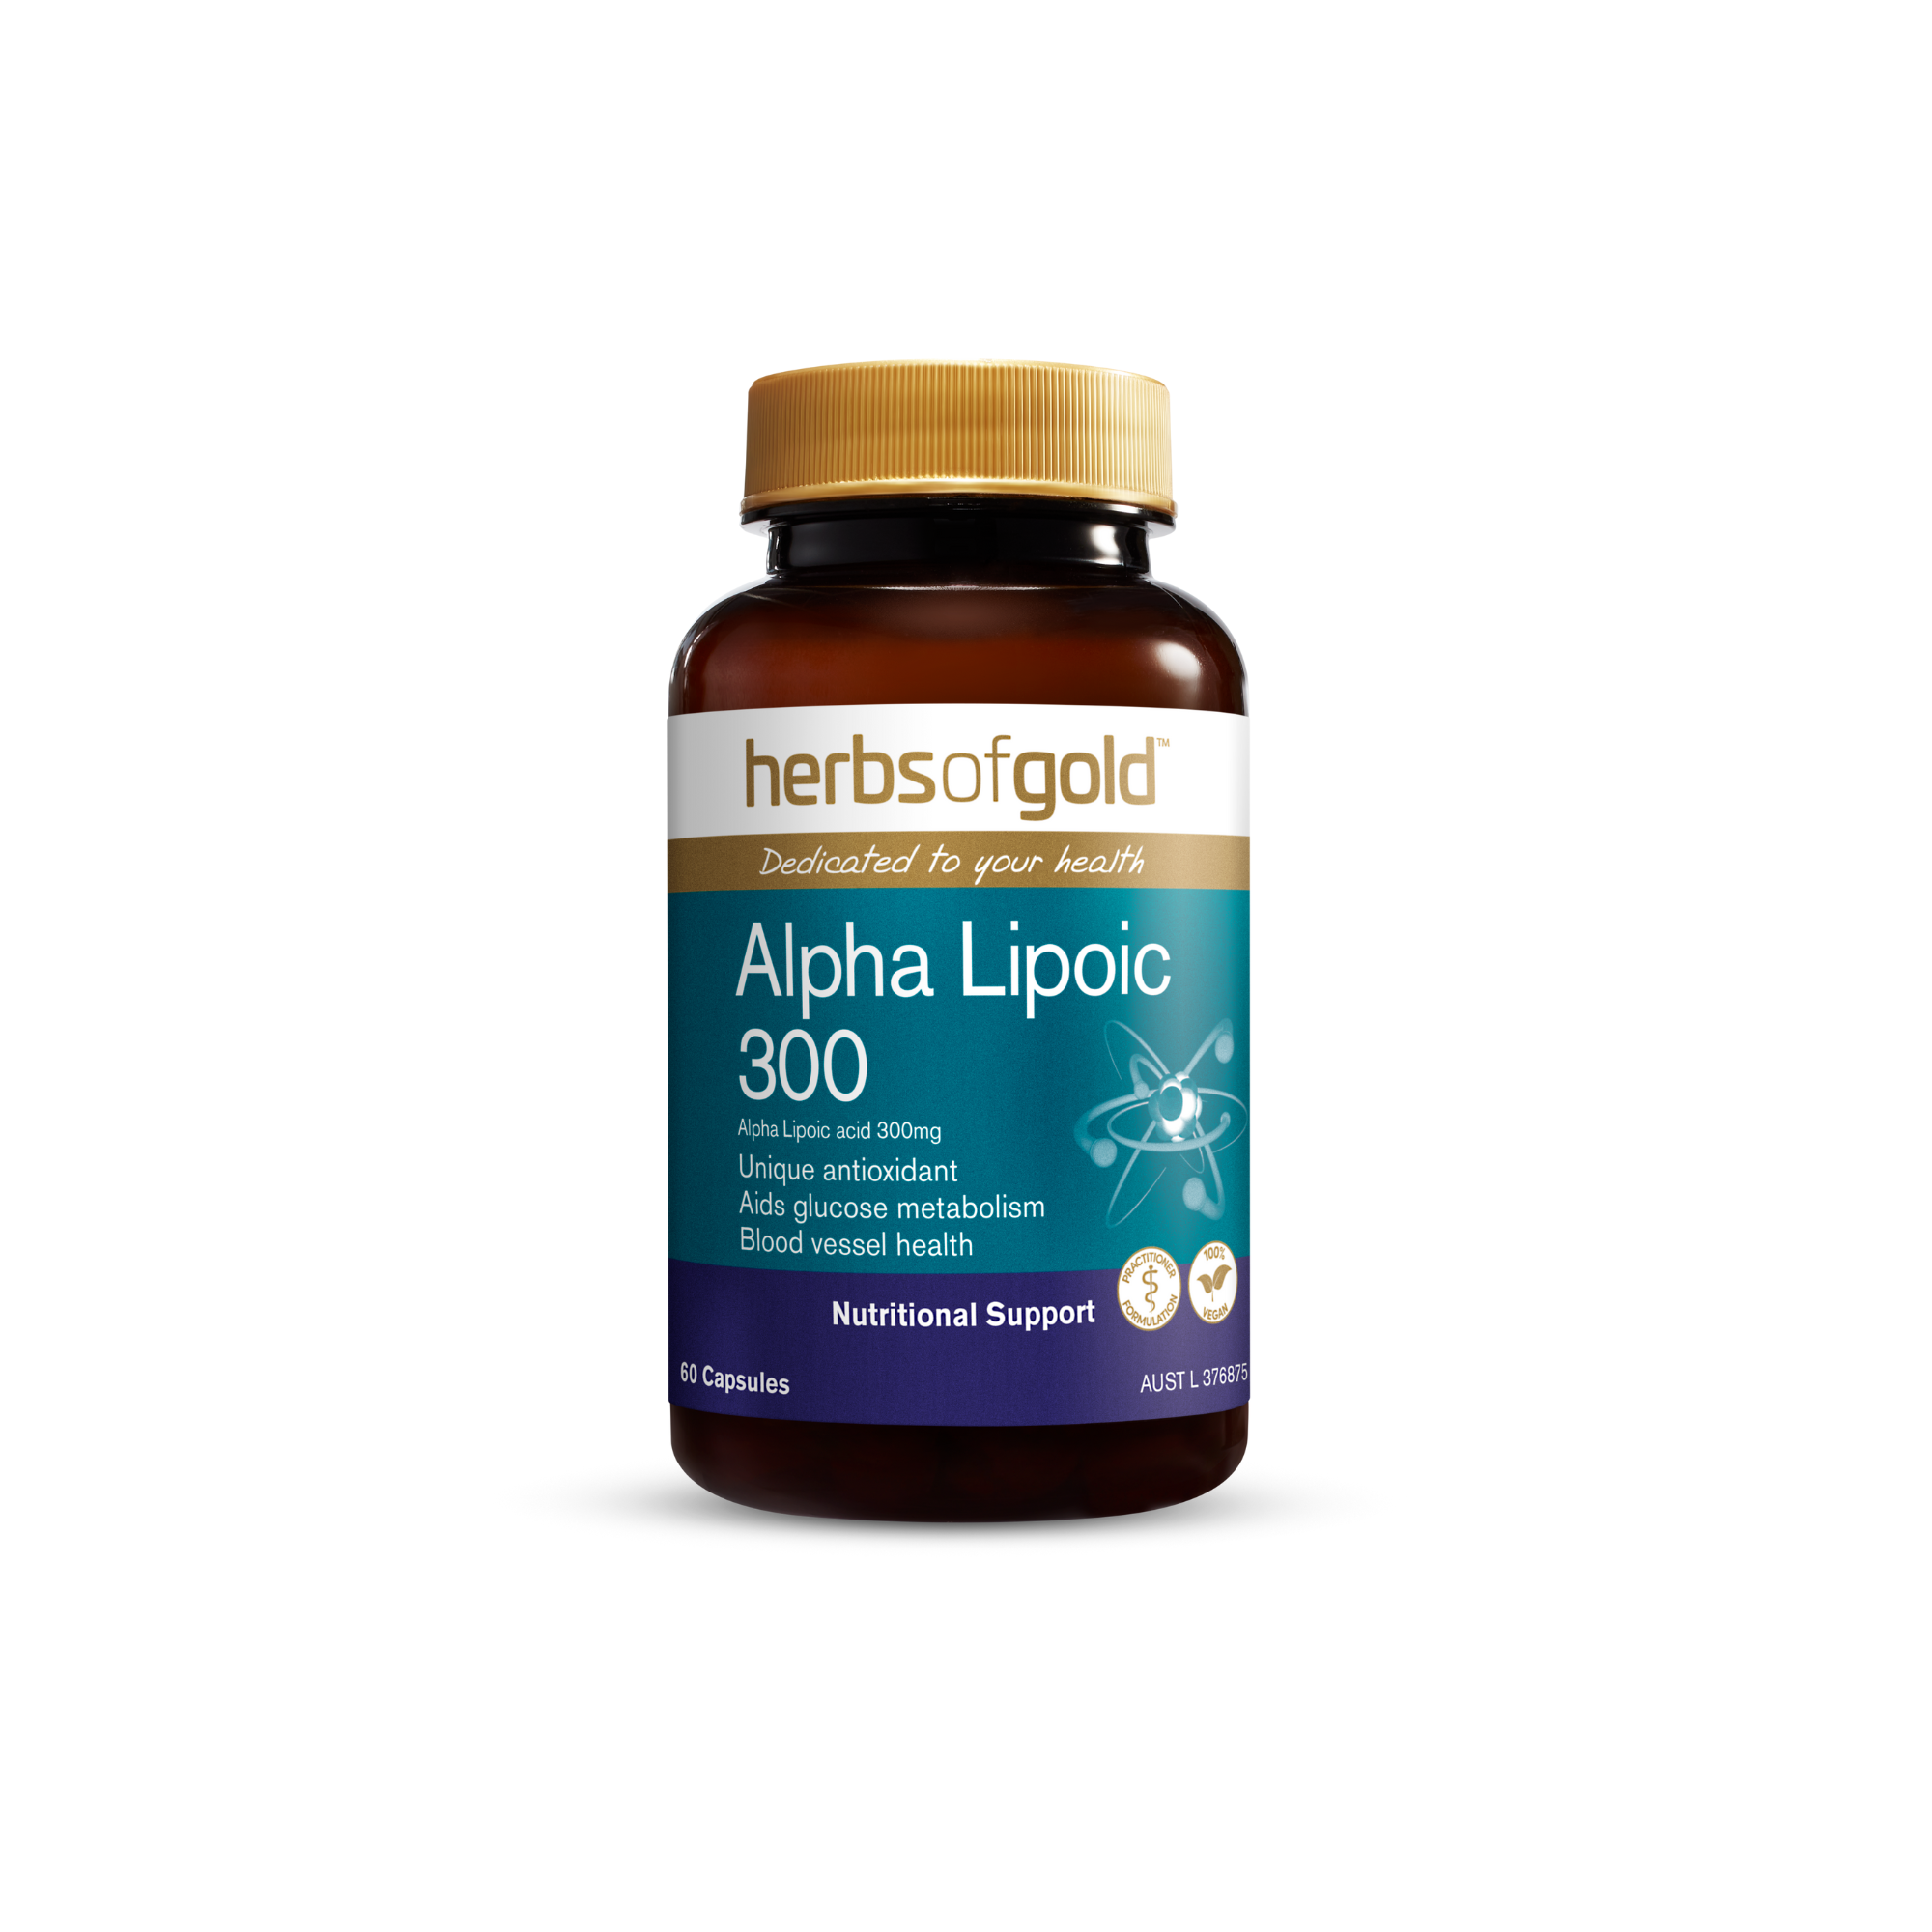 Herbs of Gold, Alpha Lipoic 300 - 60 Capsules